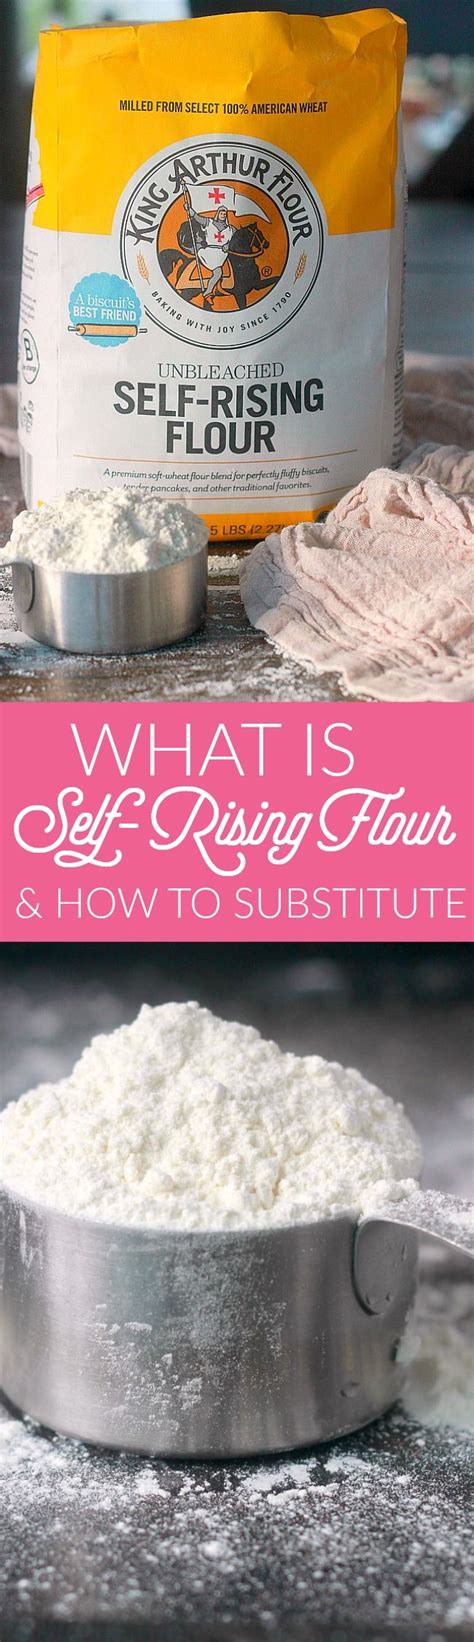 This kind of flour has salt and a leavening agent already mixed into it, eliminating the need to add these two ingredients to the. Self-Rising Flour Substitute | Recipe | Self rising flour ...